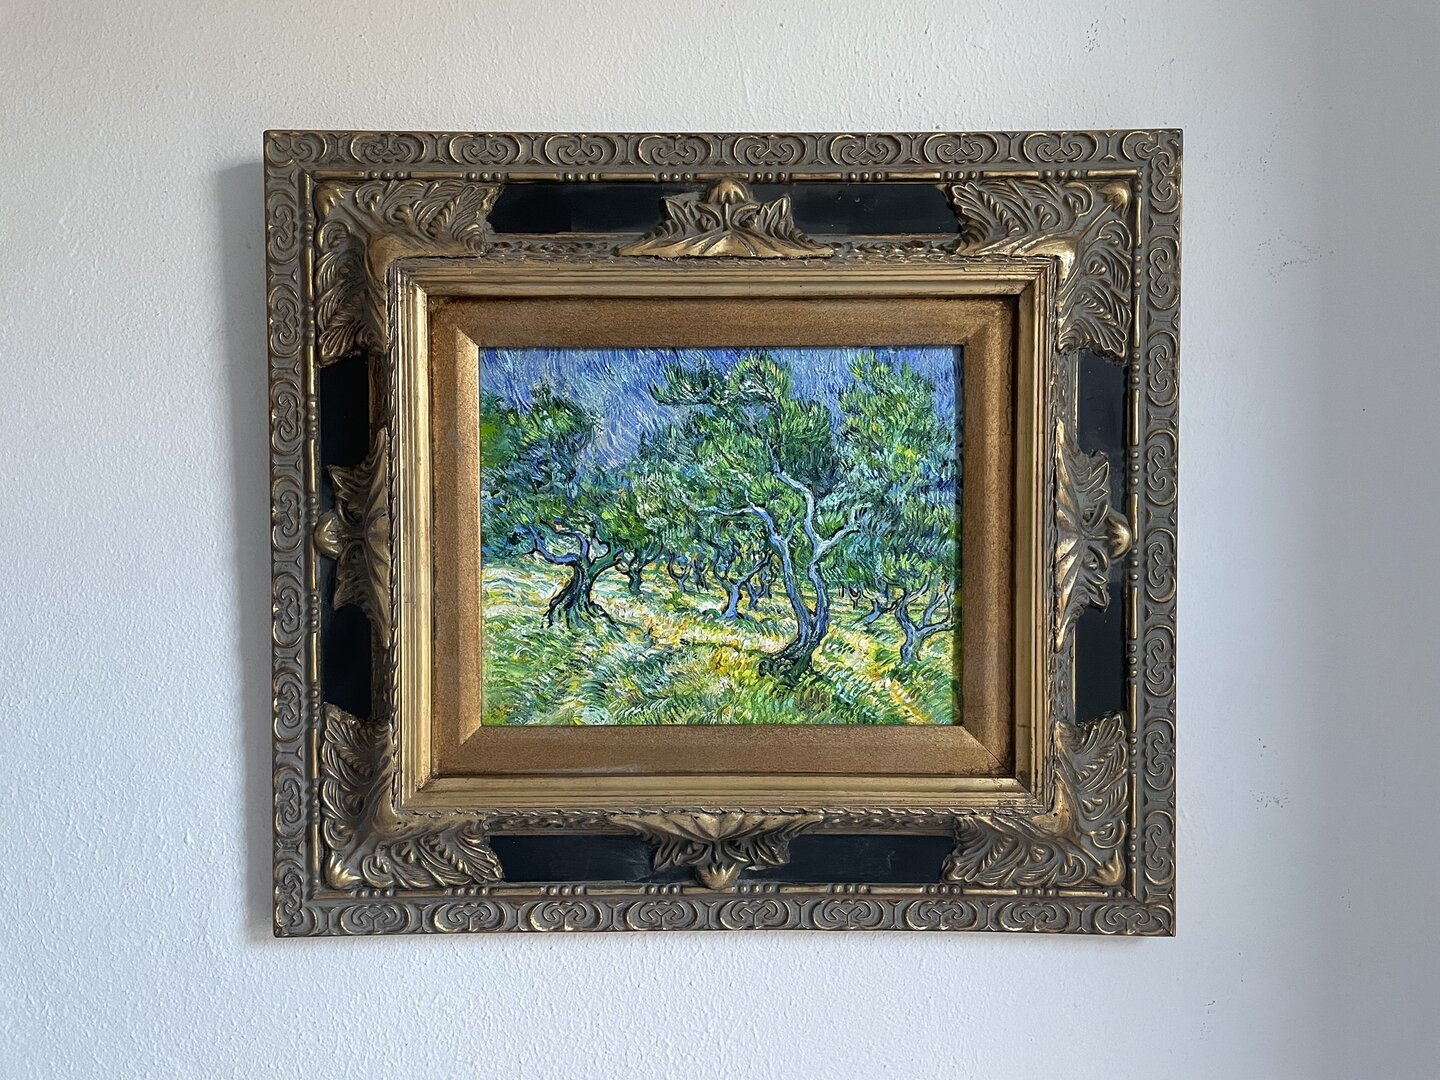 Small Olive Grove replica with vintage Italian frame